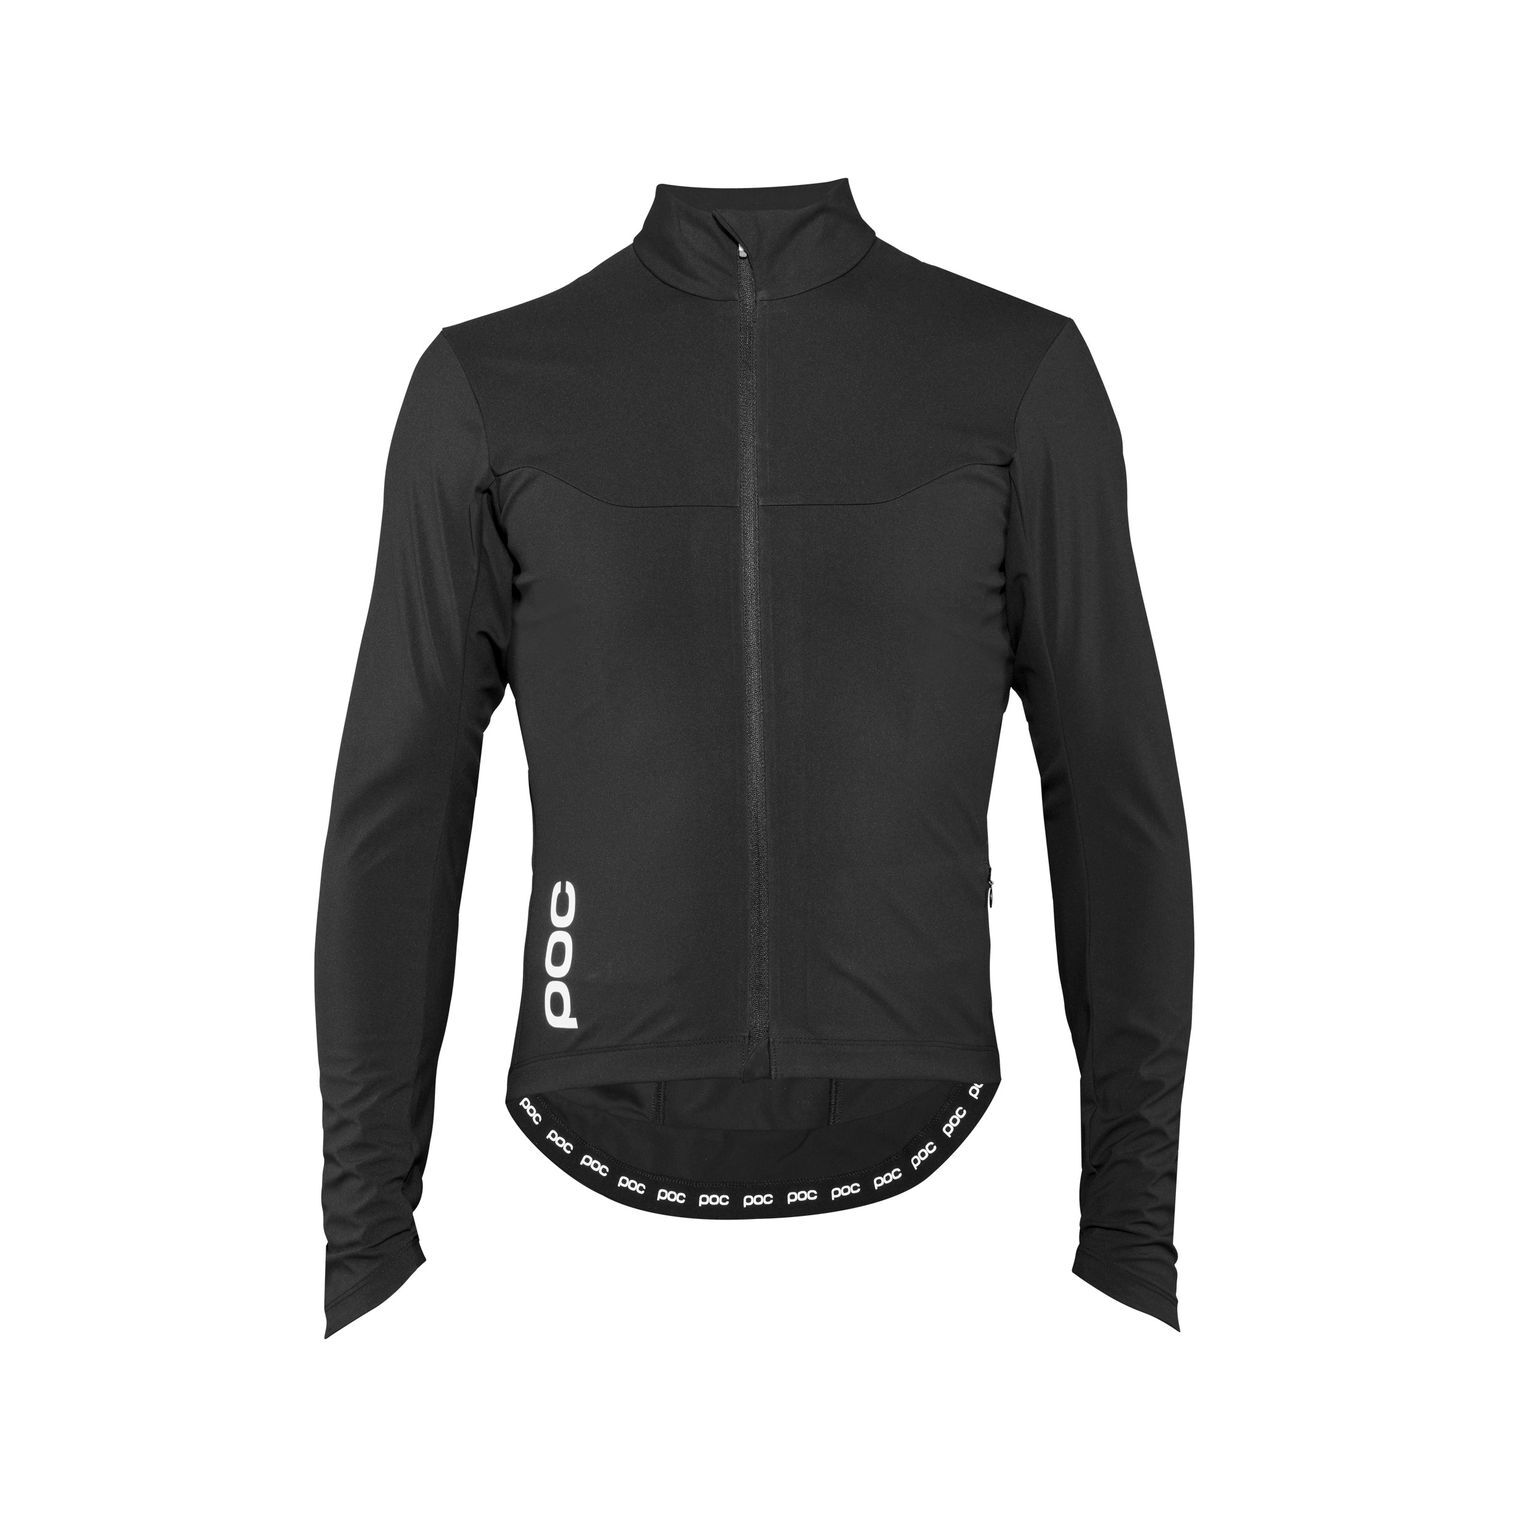 Poc Essential Road Windproof Jersey - Cycling jacket - Men's